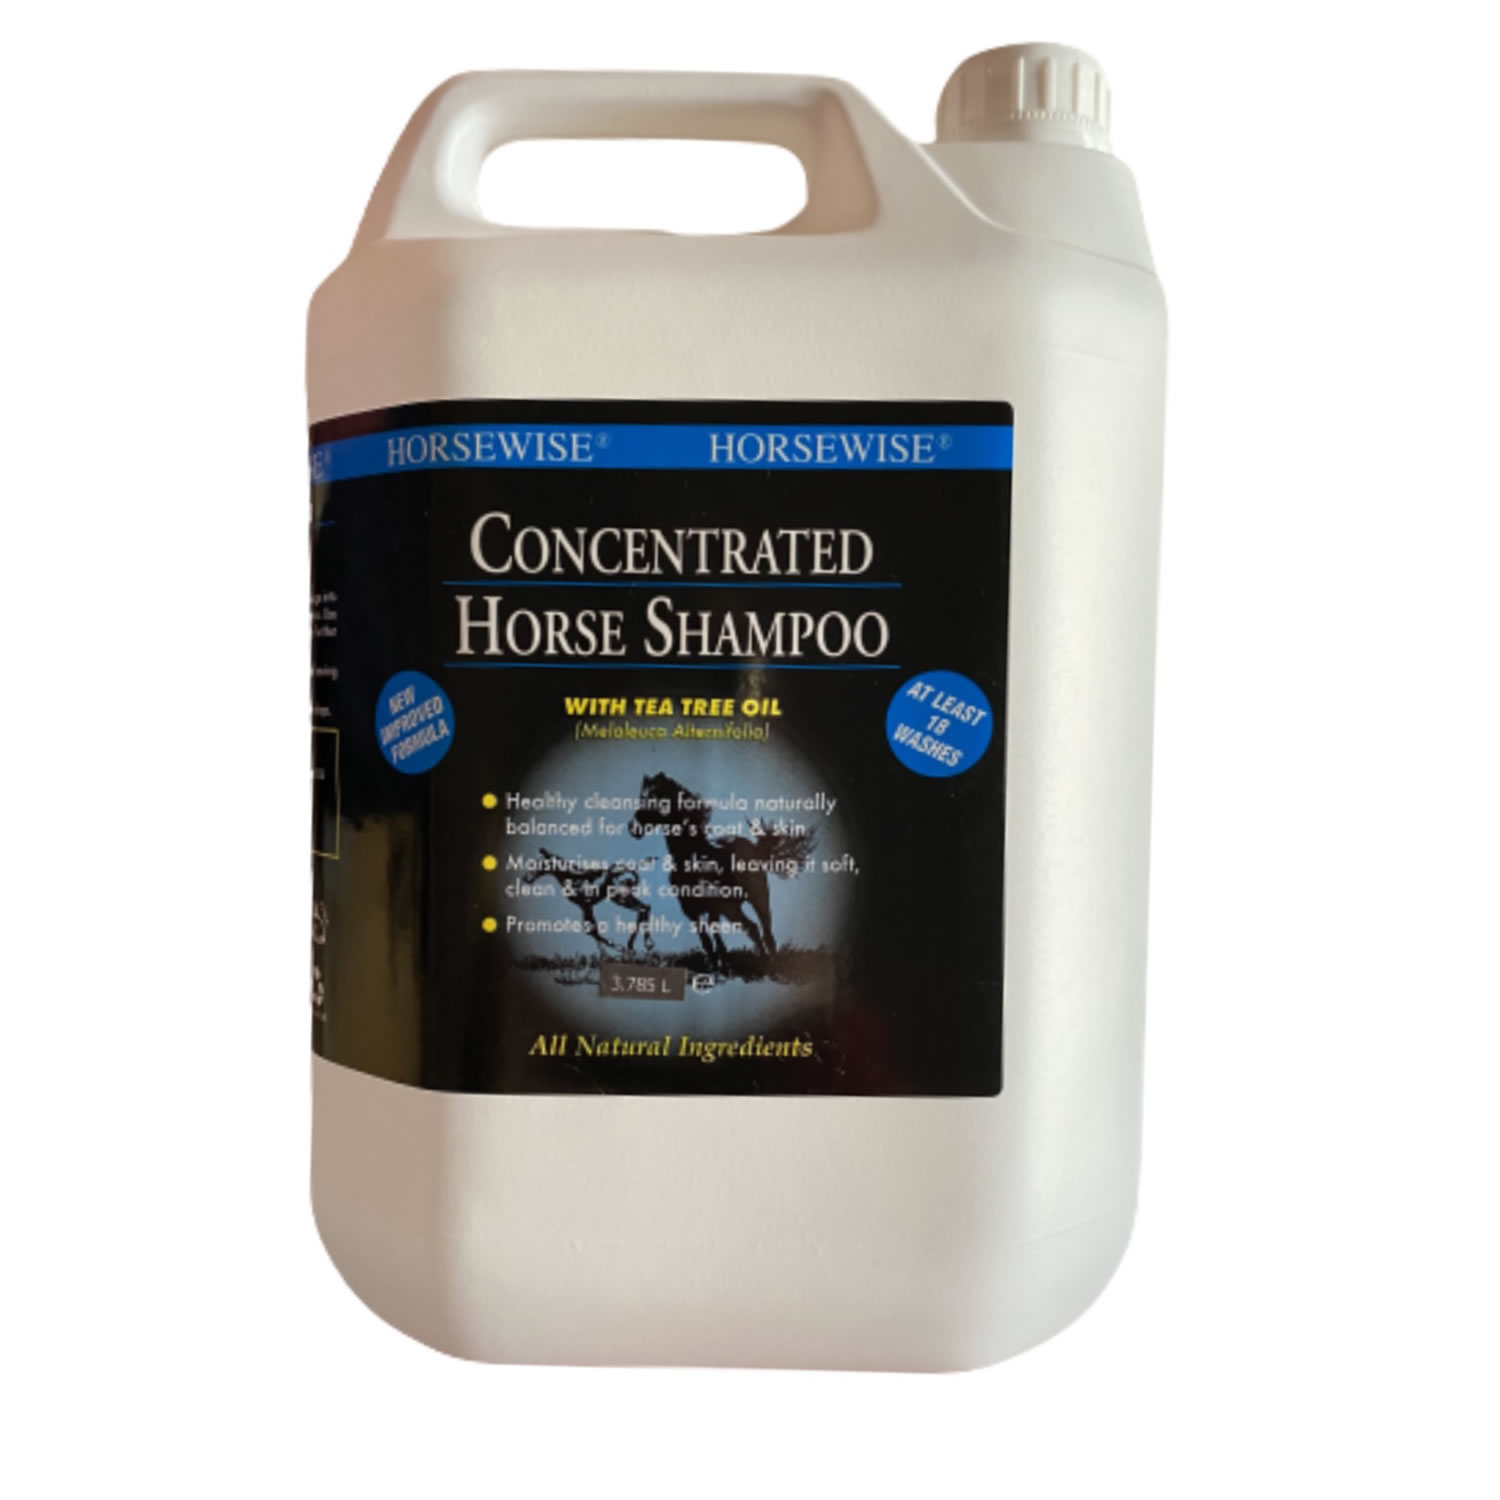 HORSEWISE CONCENTRATED SHAMPOO 3.785 LT 3.785 LT REFILL